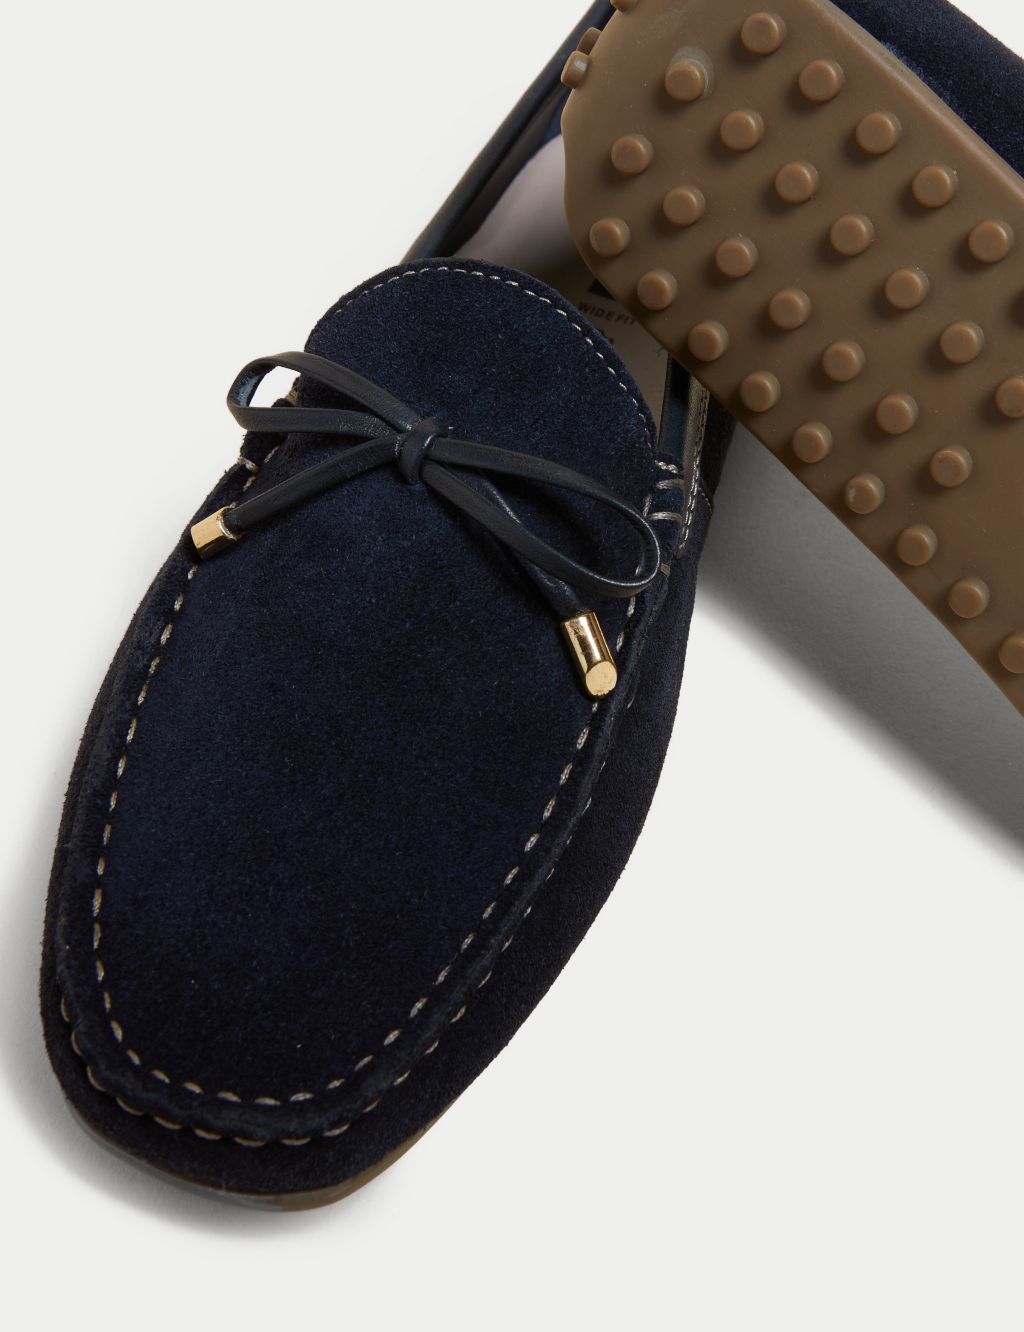 Wide Fit Suede Bow Boat Shoes image 3